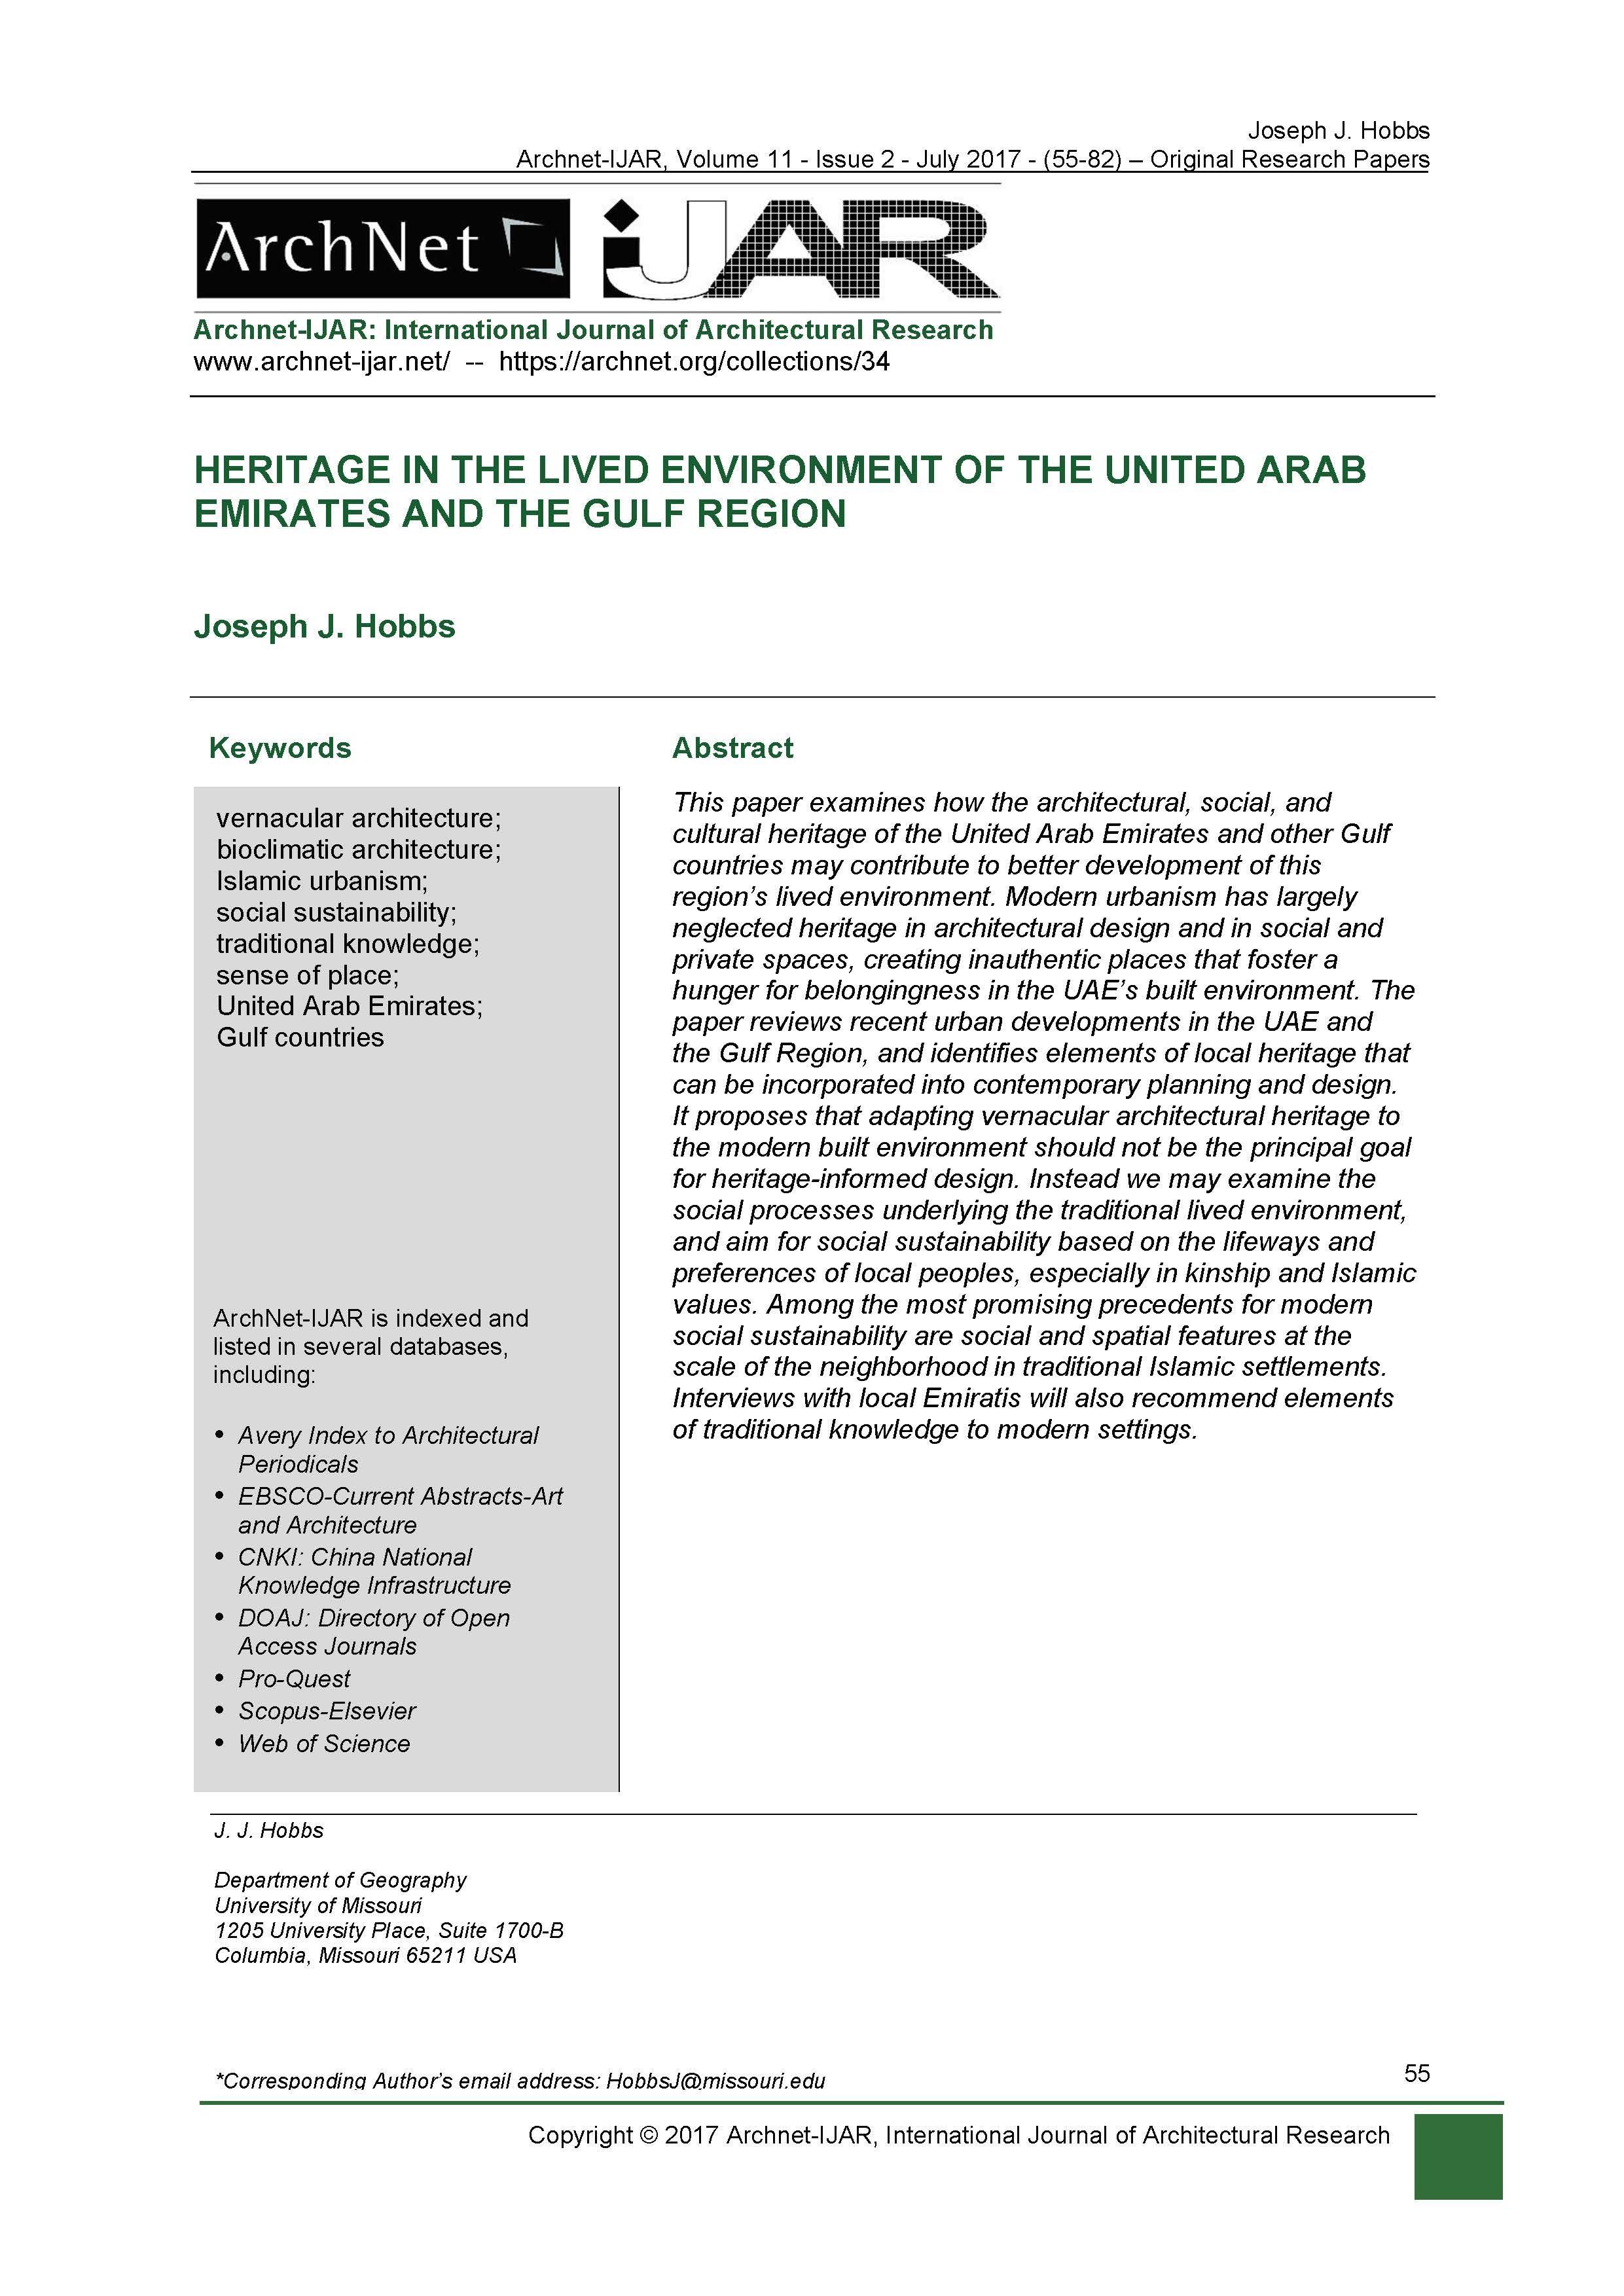 Heritage in the Lived Environment of the United Arab Emirates and the Gulf Region